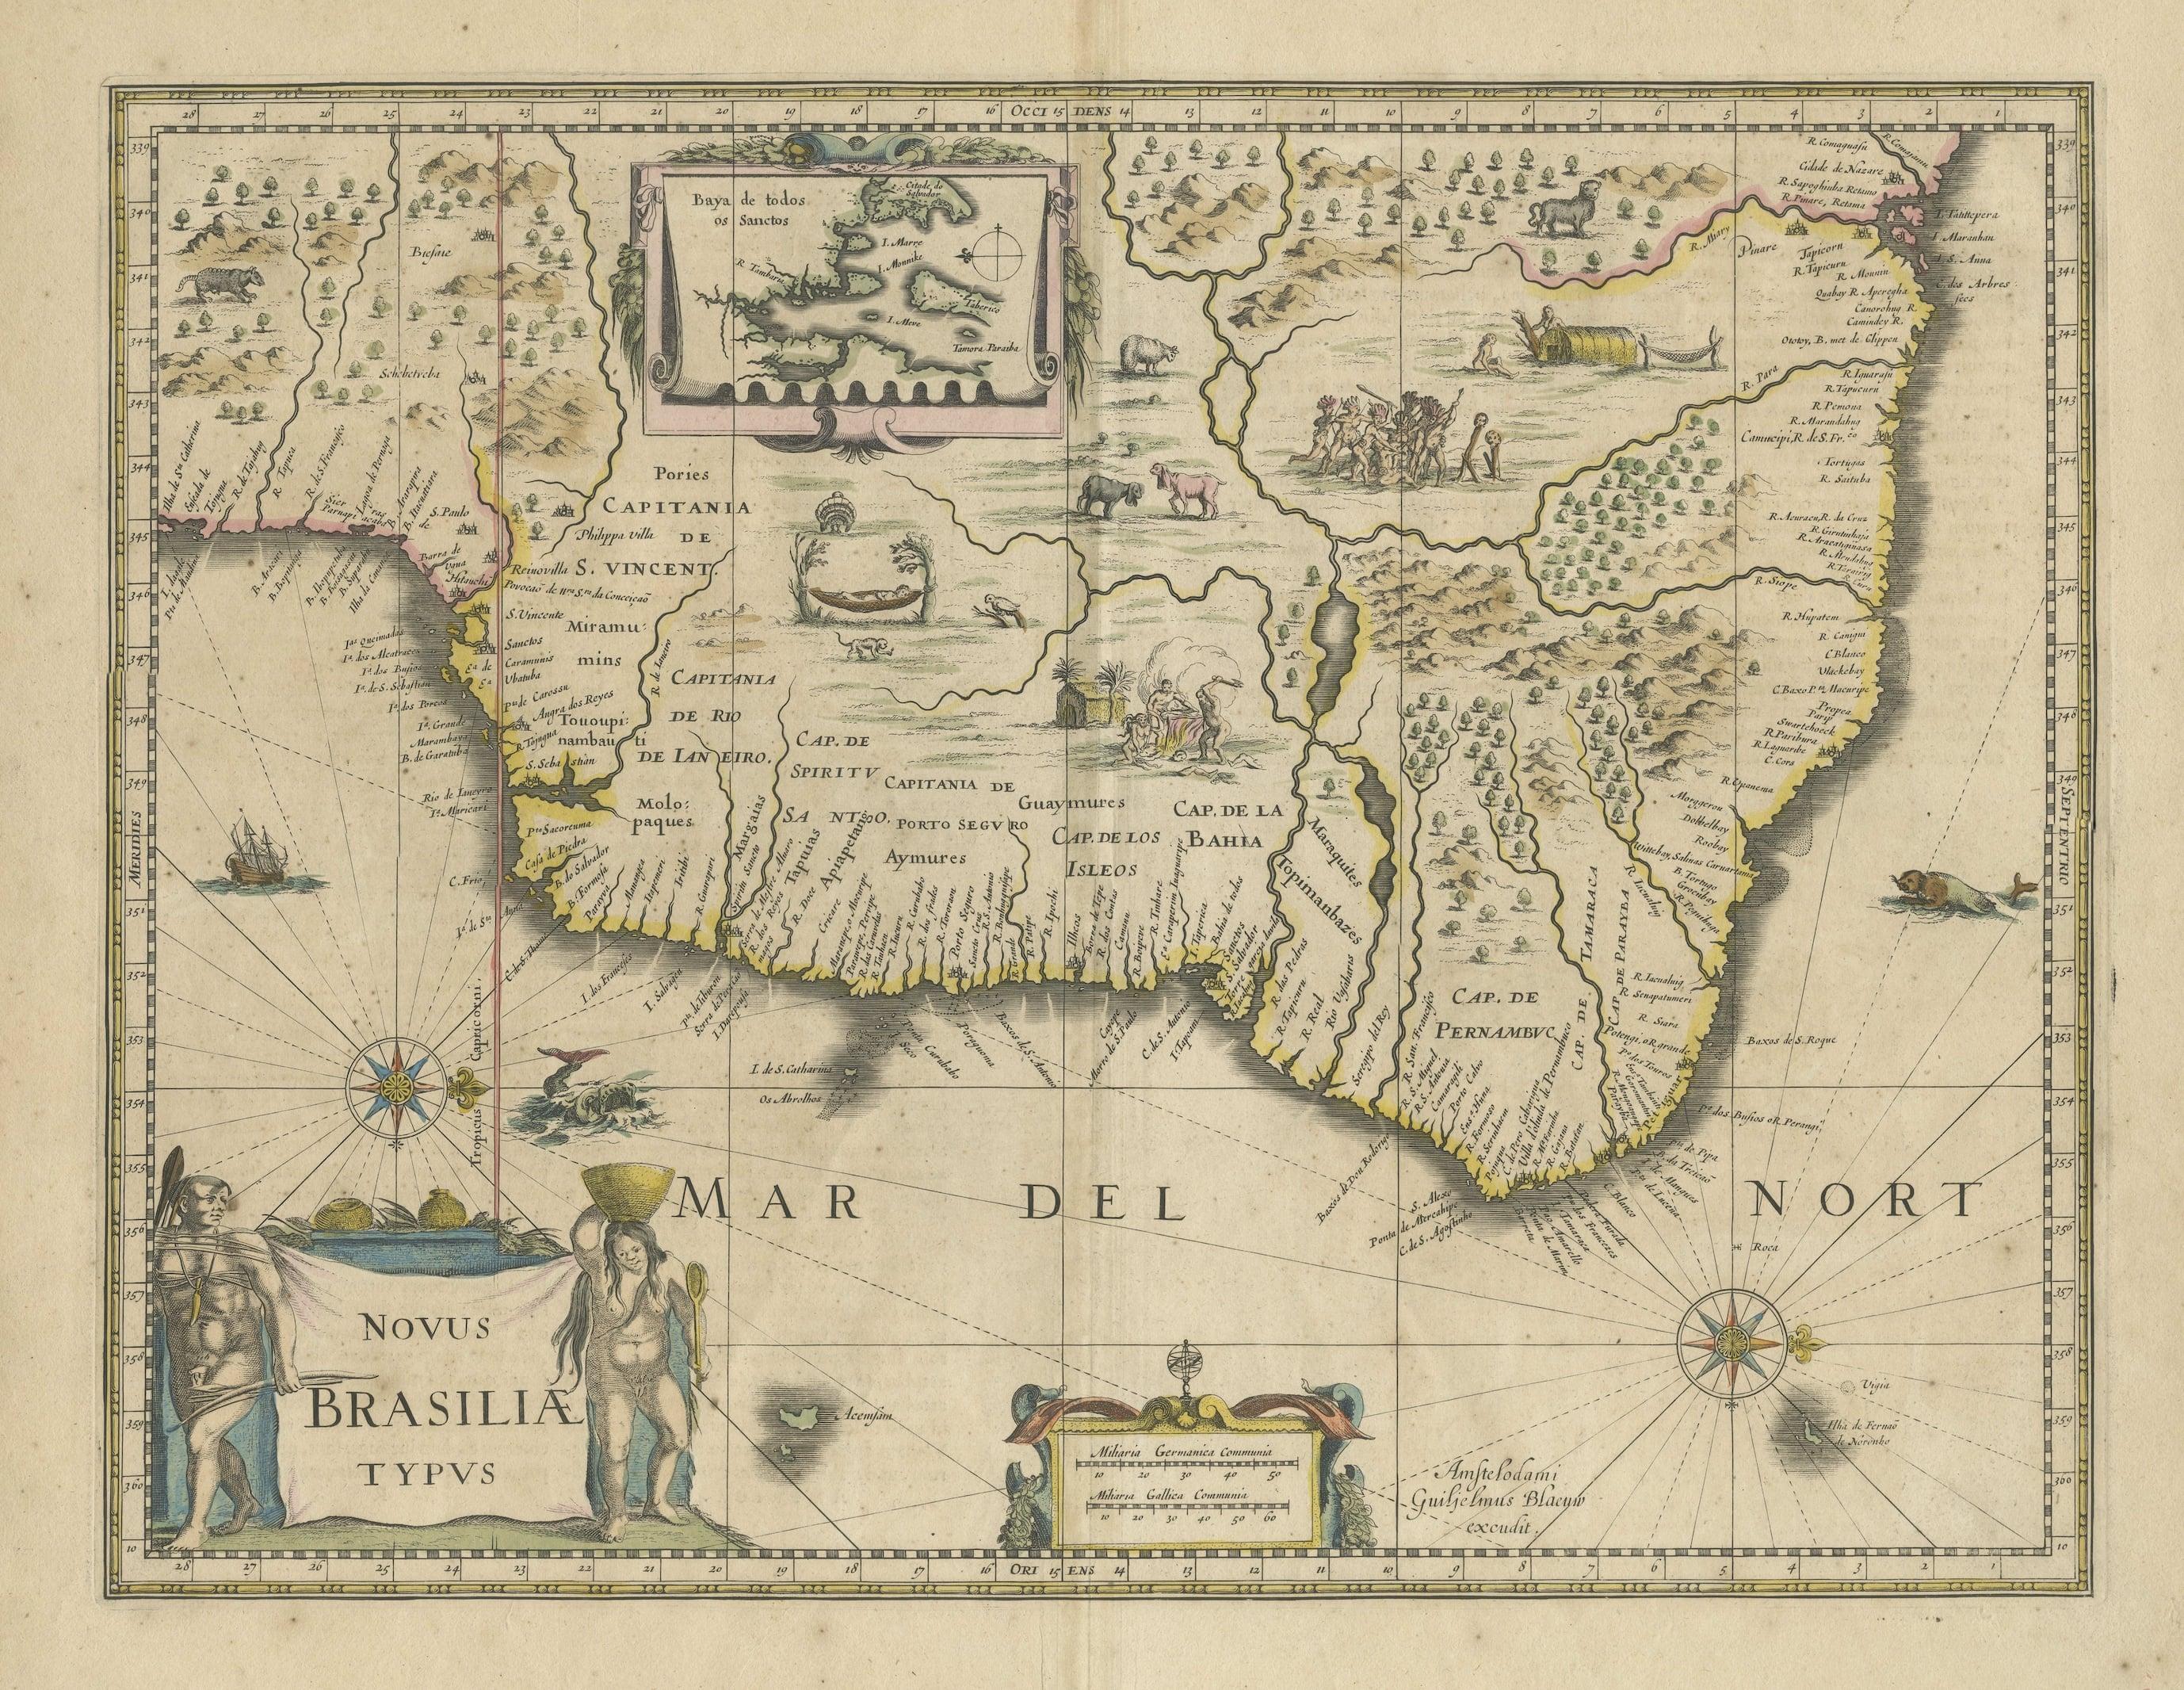 Antique map titled 'Novus Brasiliae Typus'. Fine old color example of Blaeu's first map of Brazil, with north oriented to the right. Includes inset map of Baya de todos Santos, elaborate cartouche, 2 compass roses and richly embellished vignettes of